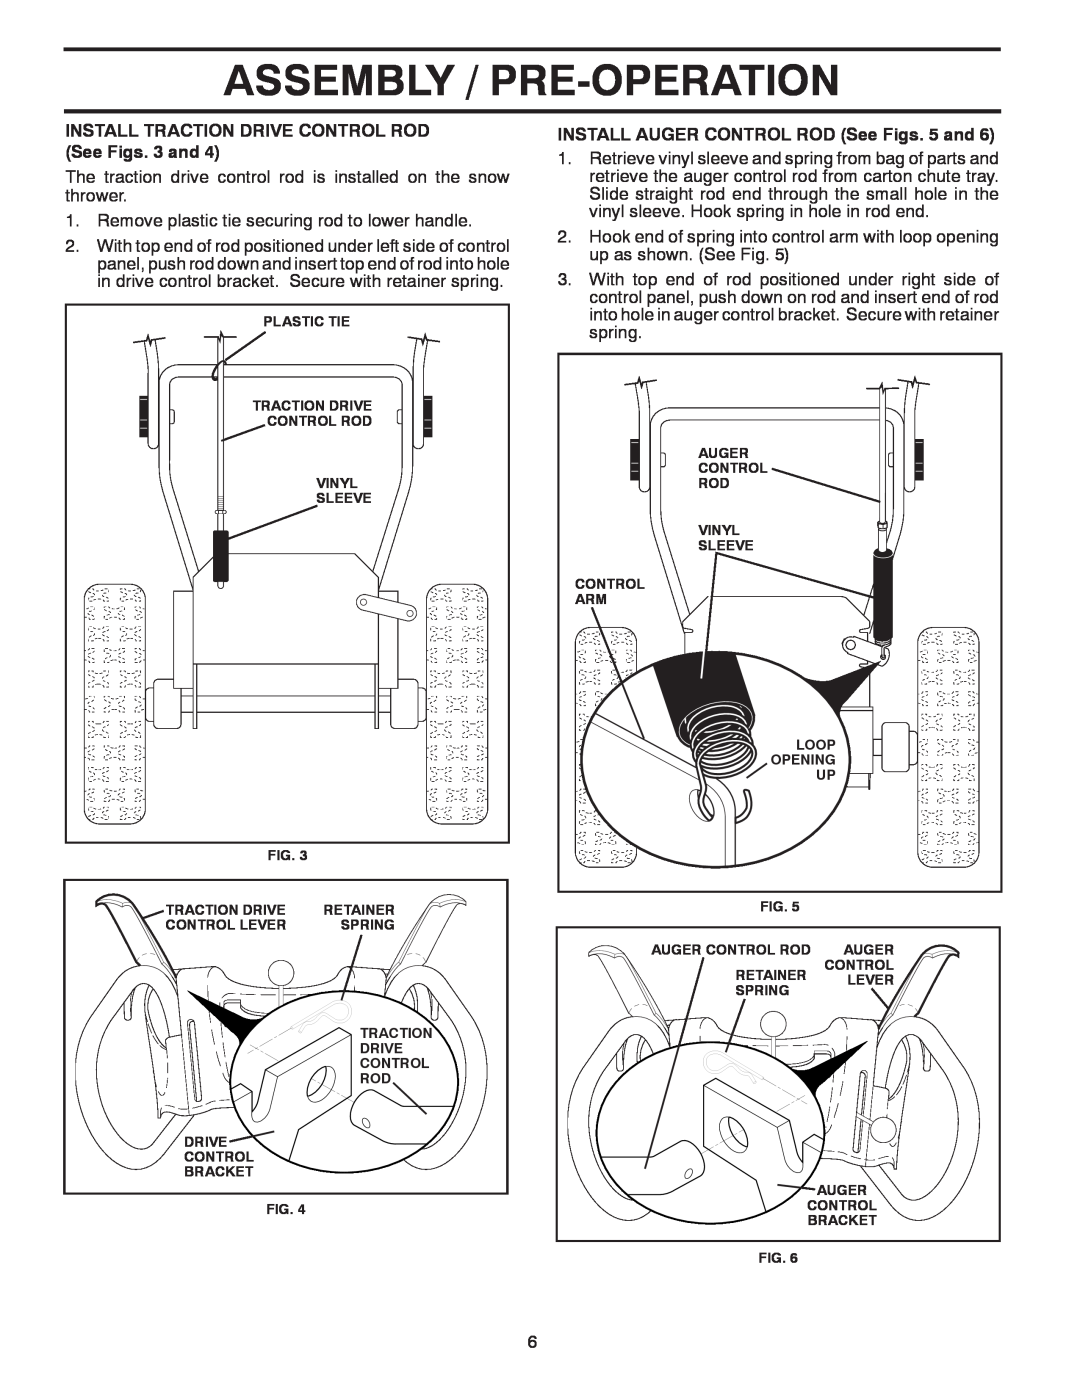 Poulan 429924, 96192003101 owner manual Assembly / Pre-Operation, INSTALL AUGER CONTROL ROD See Figs. 5 and 